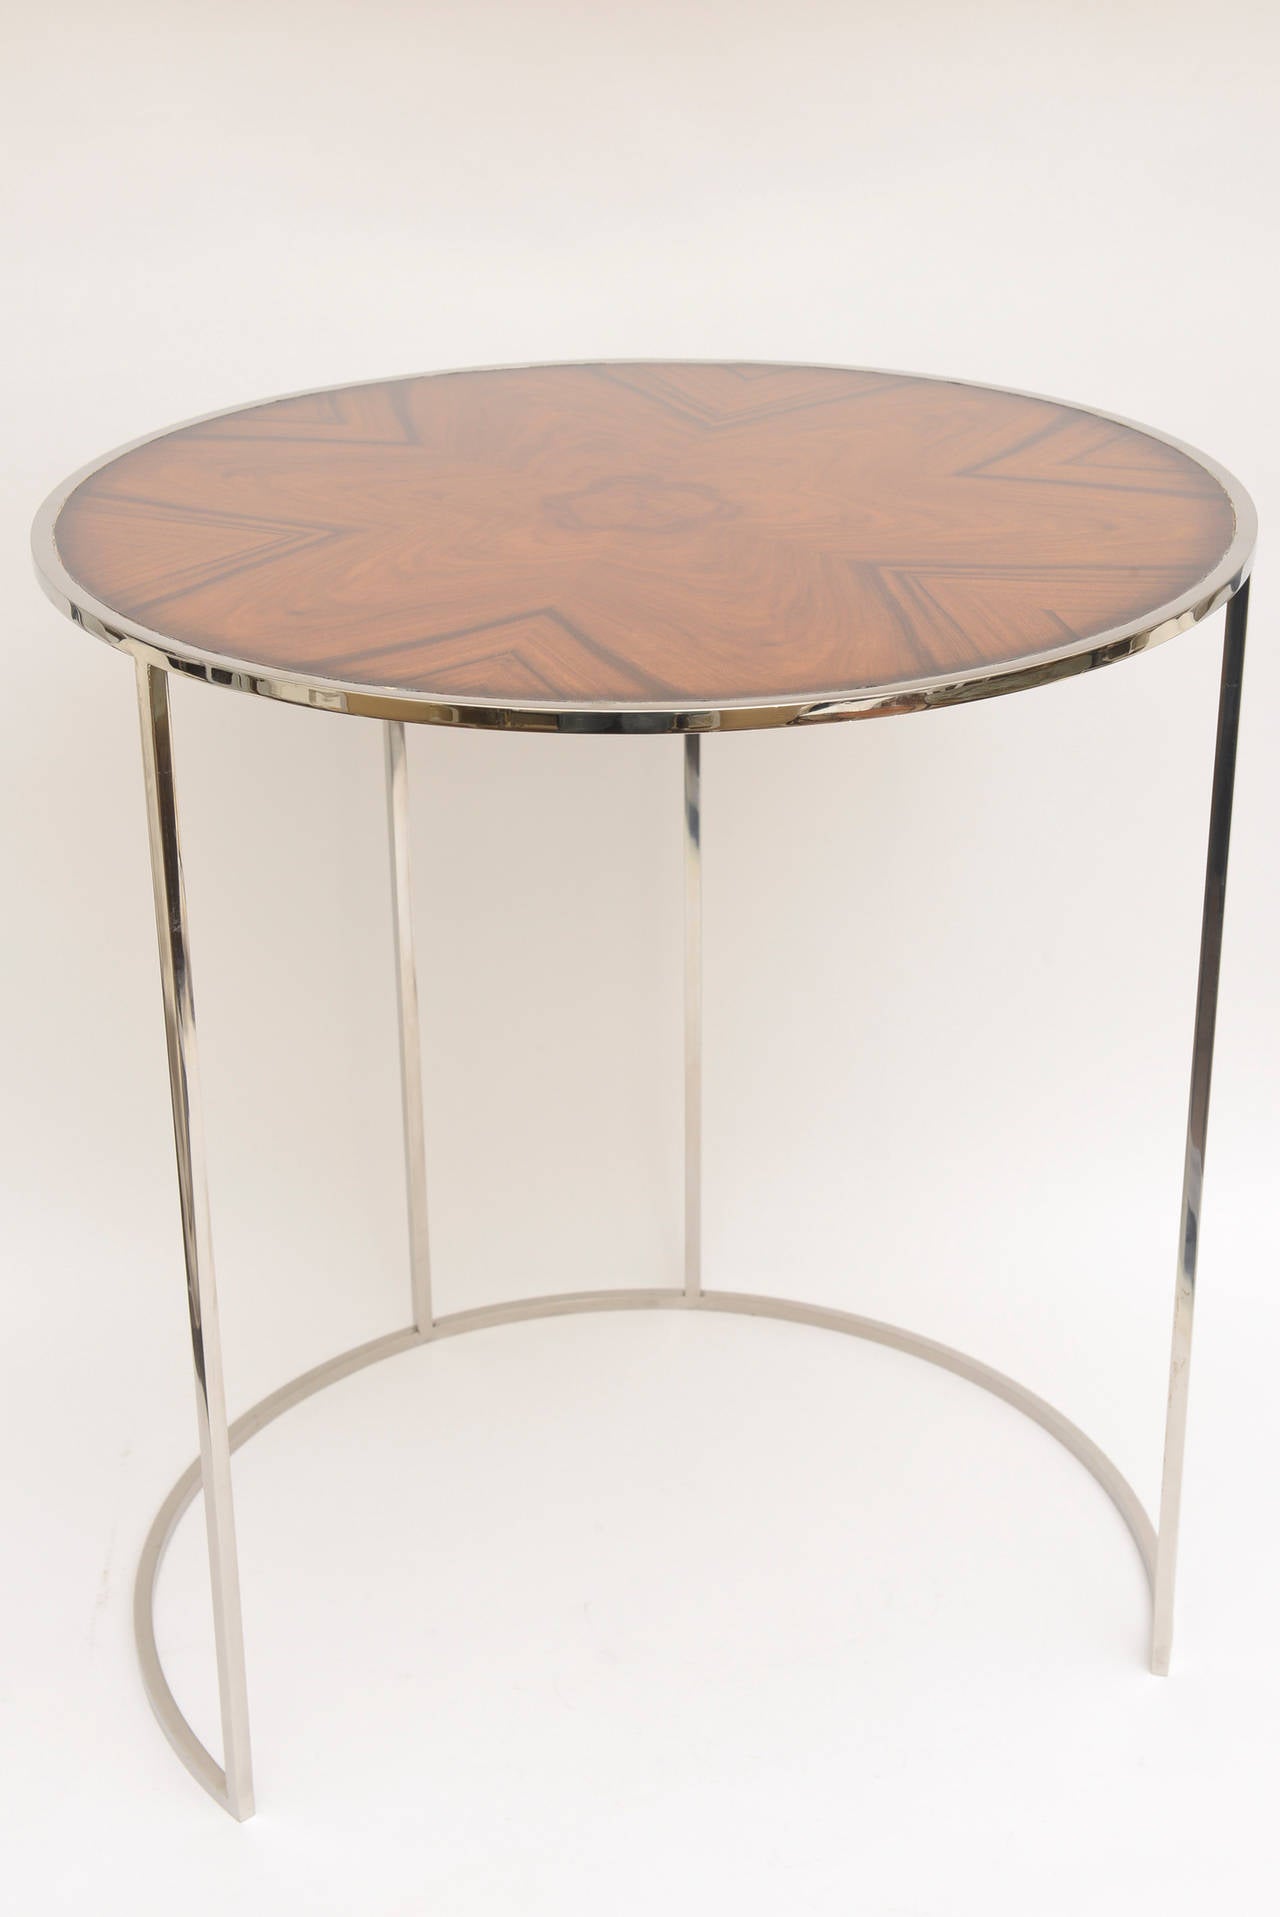 Italian Exotic Wood and Stainless Steel Nesting or Side Tables 2